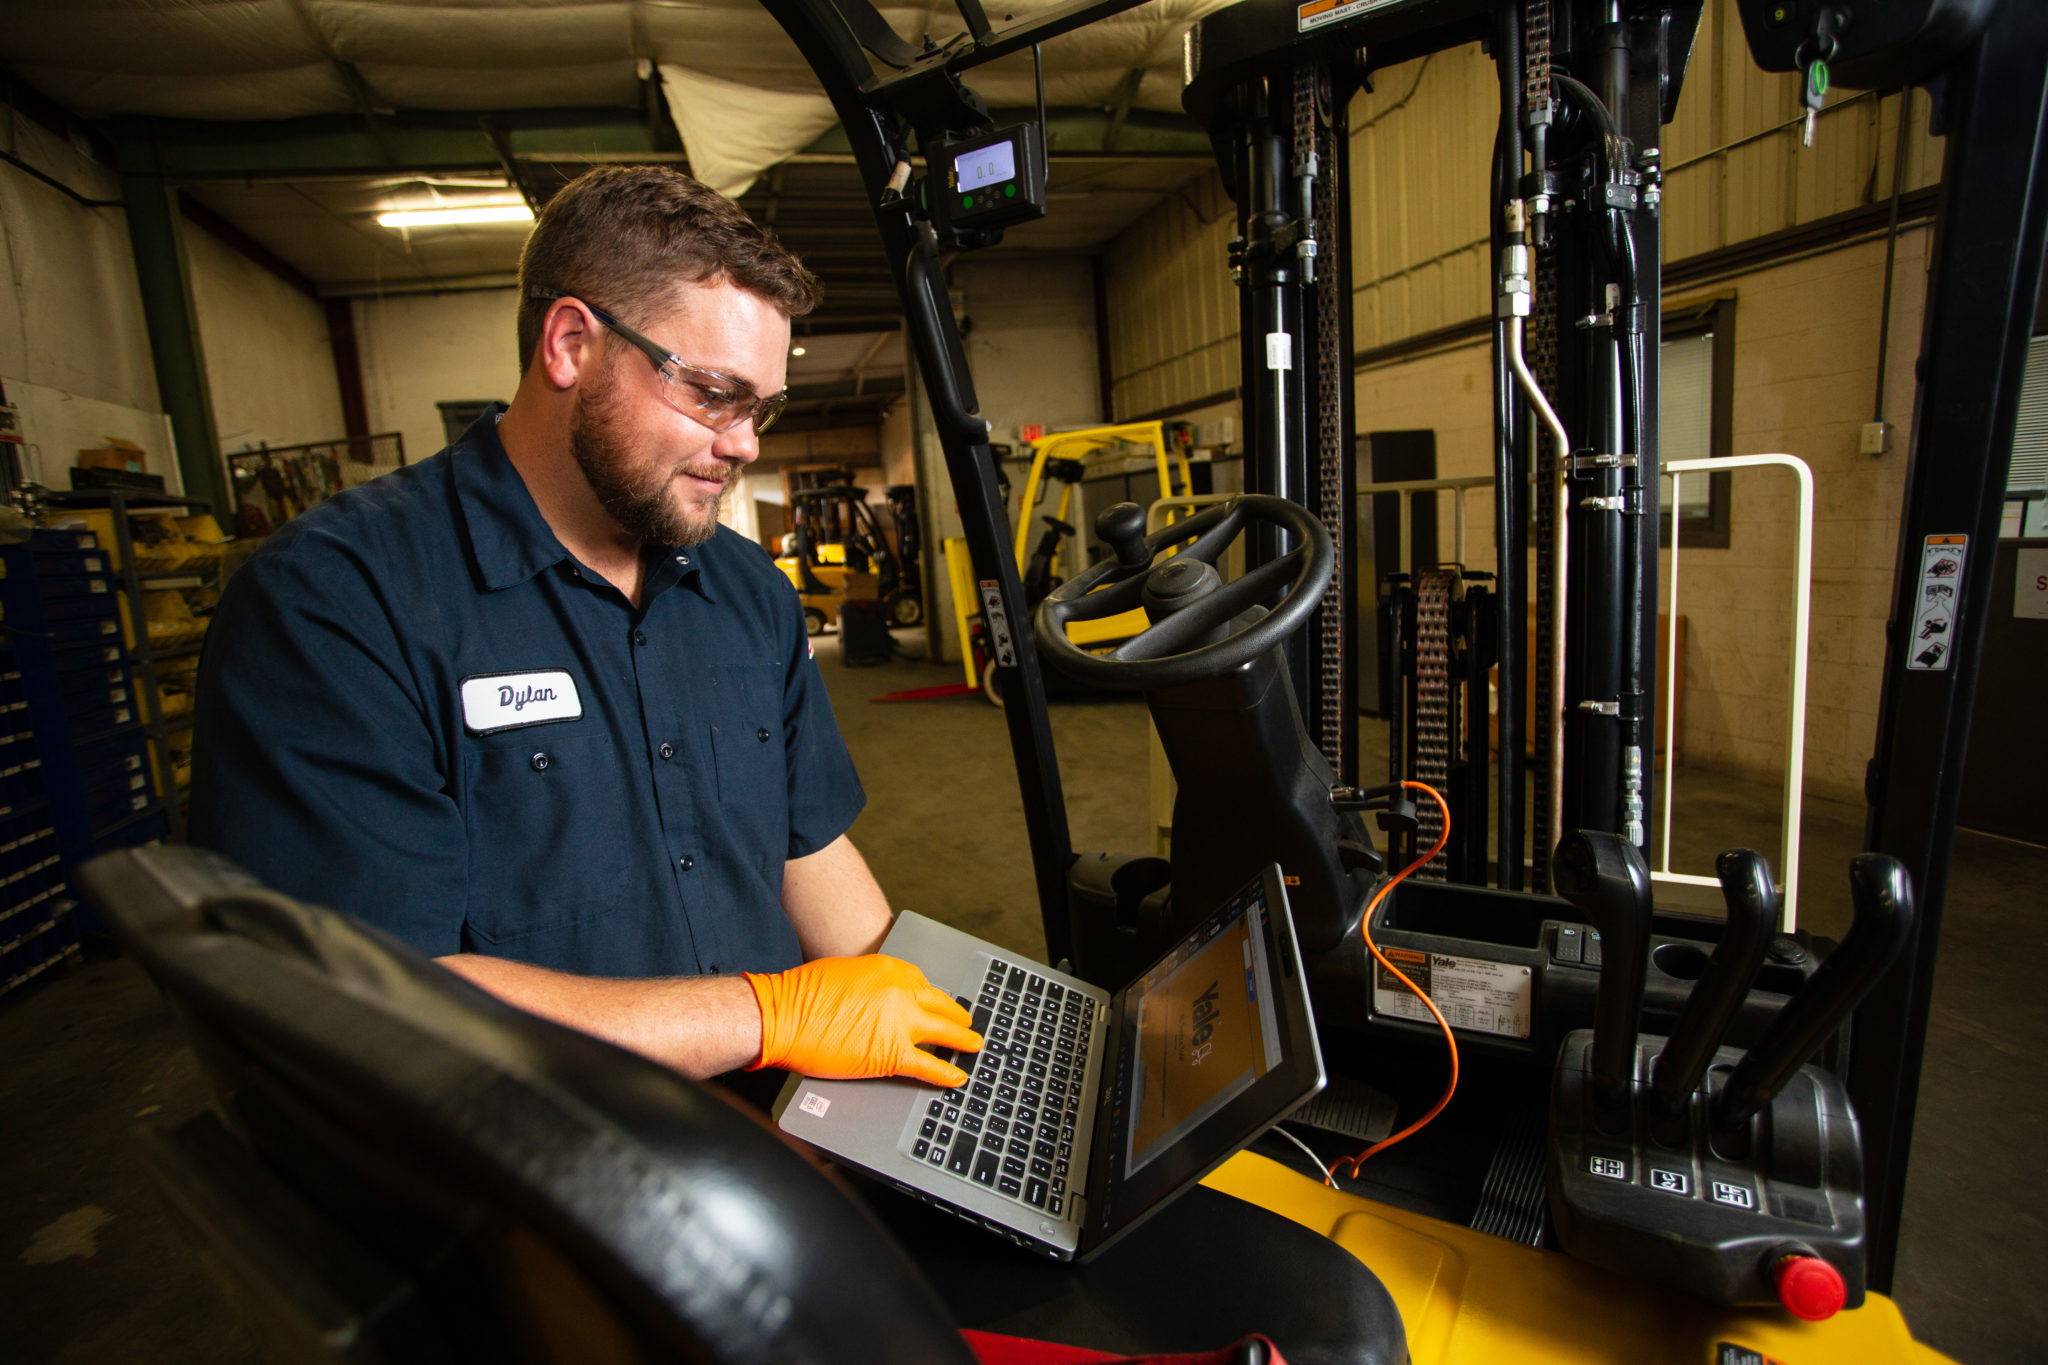 Technician Working On Yale Forklift